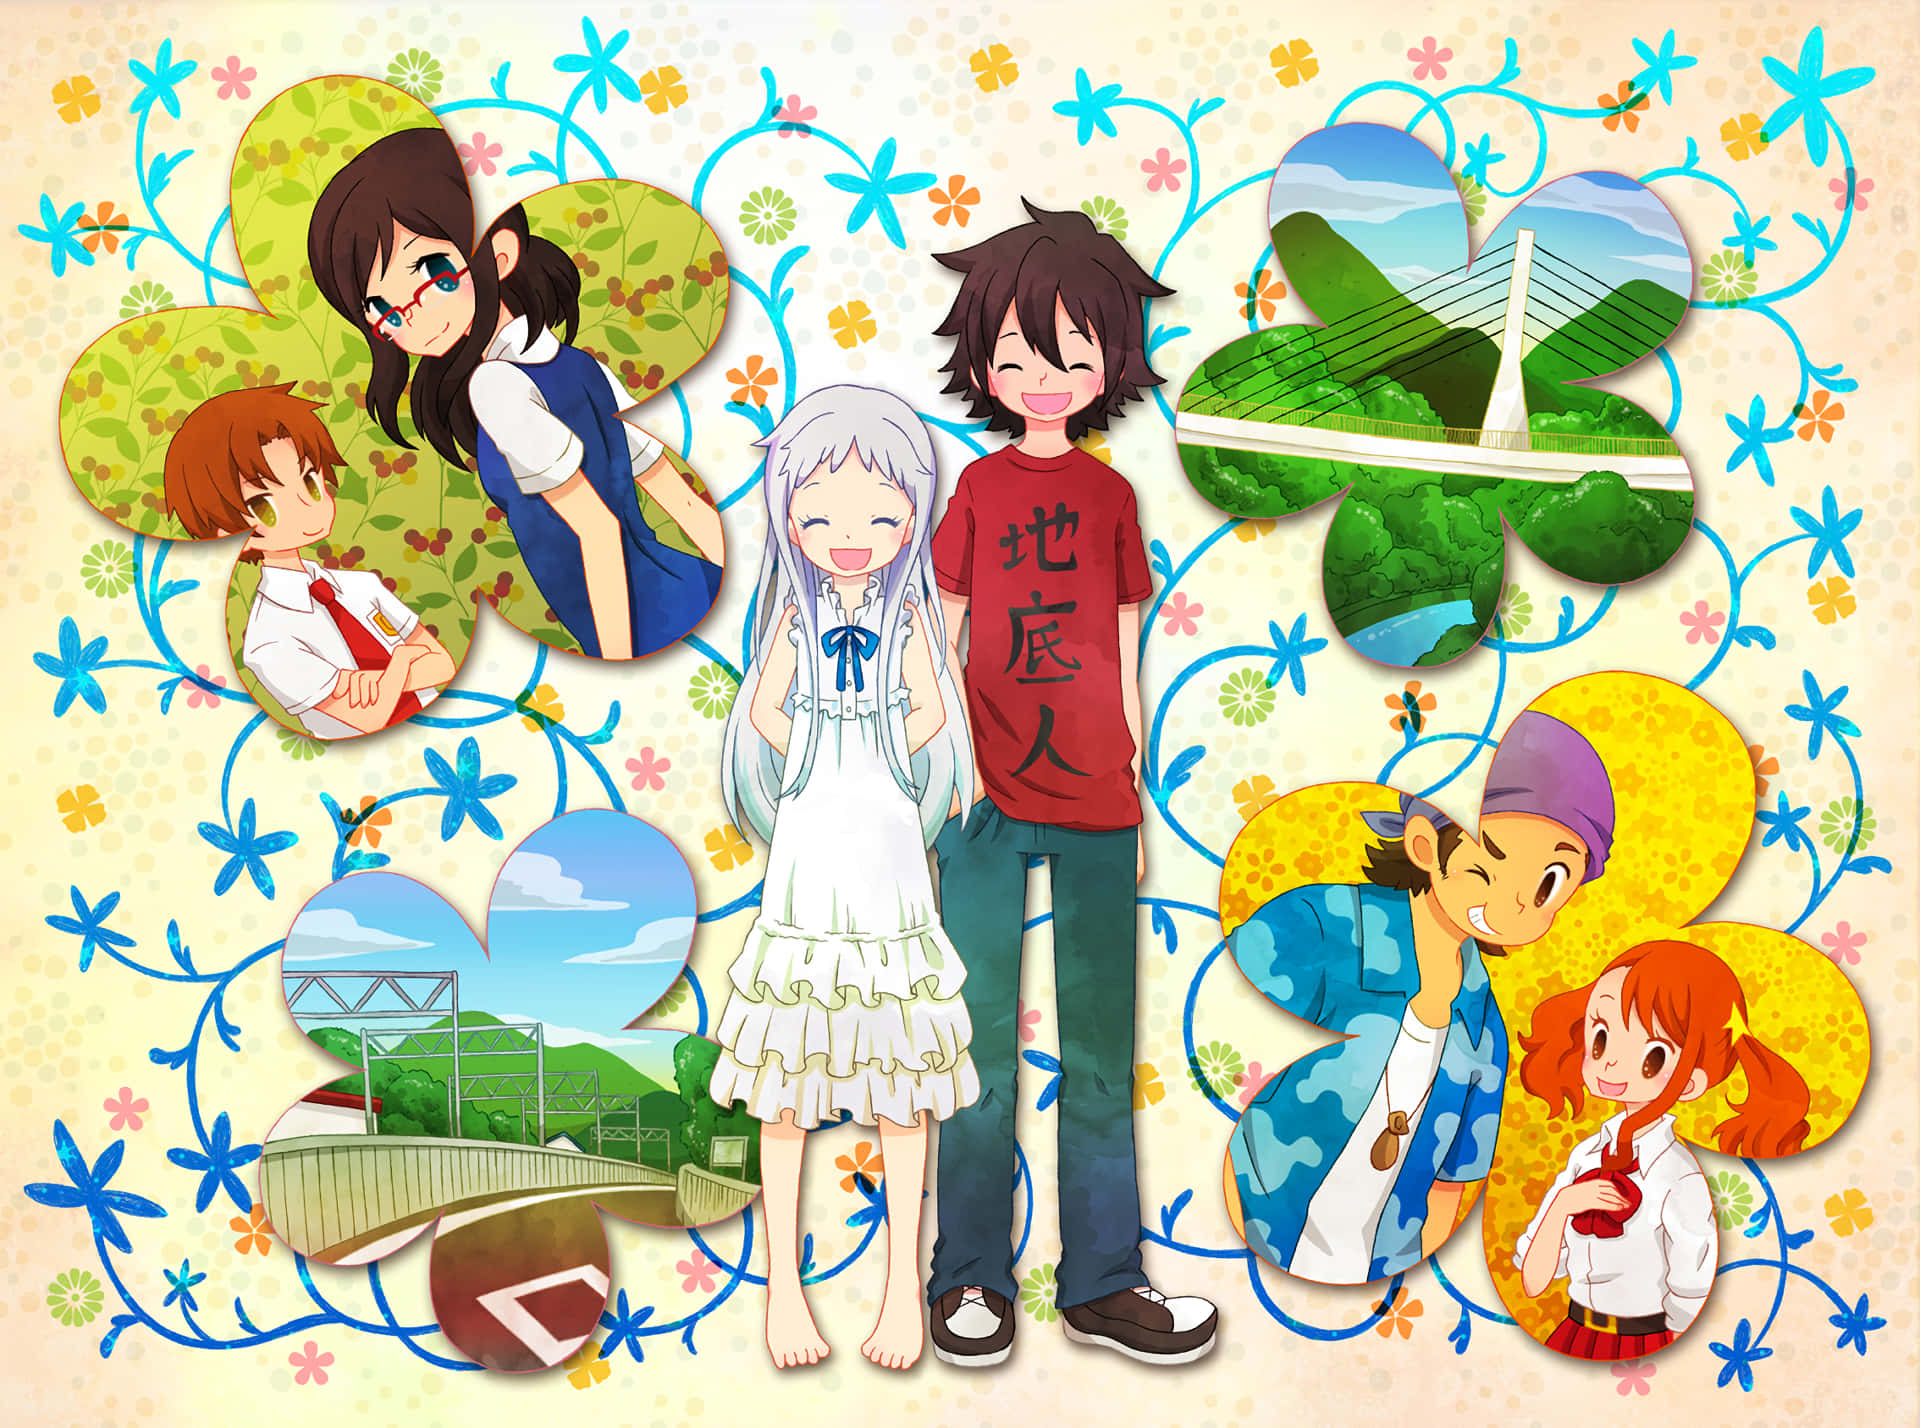 Rediscover Friendship with Anohana